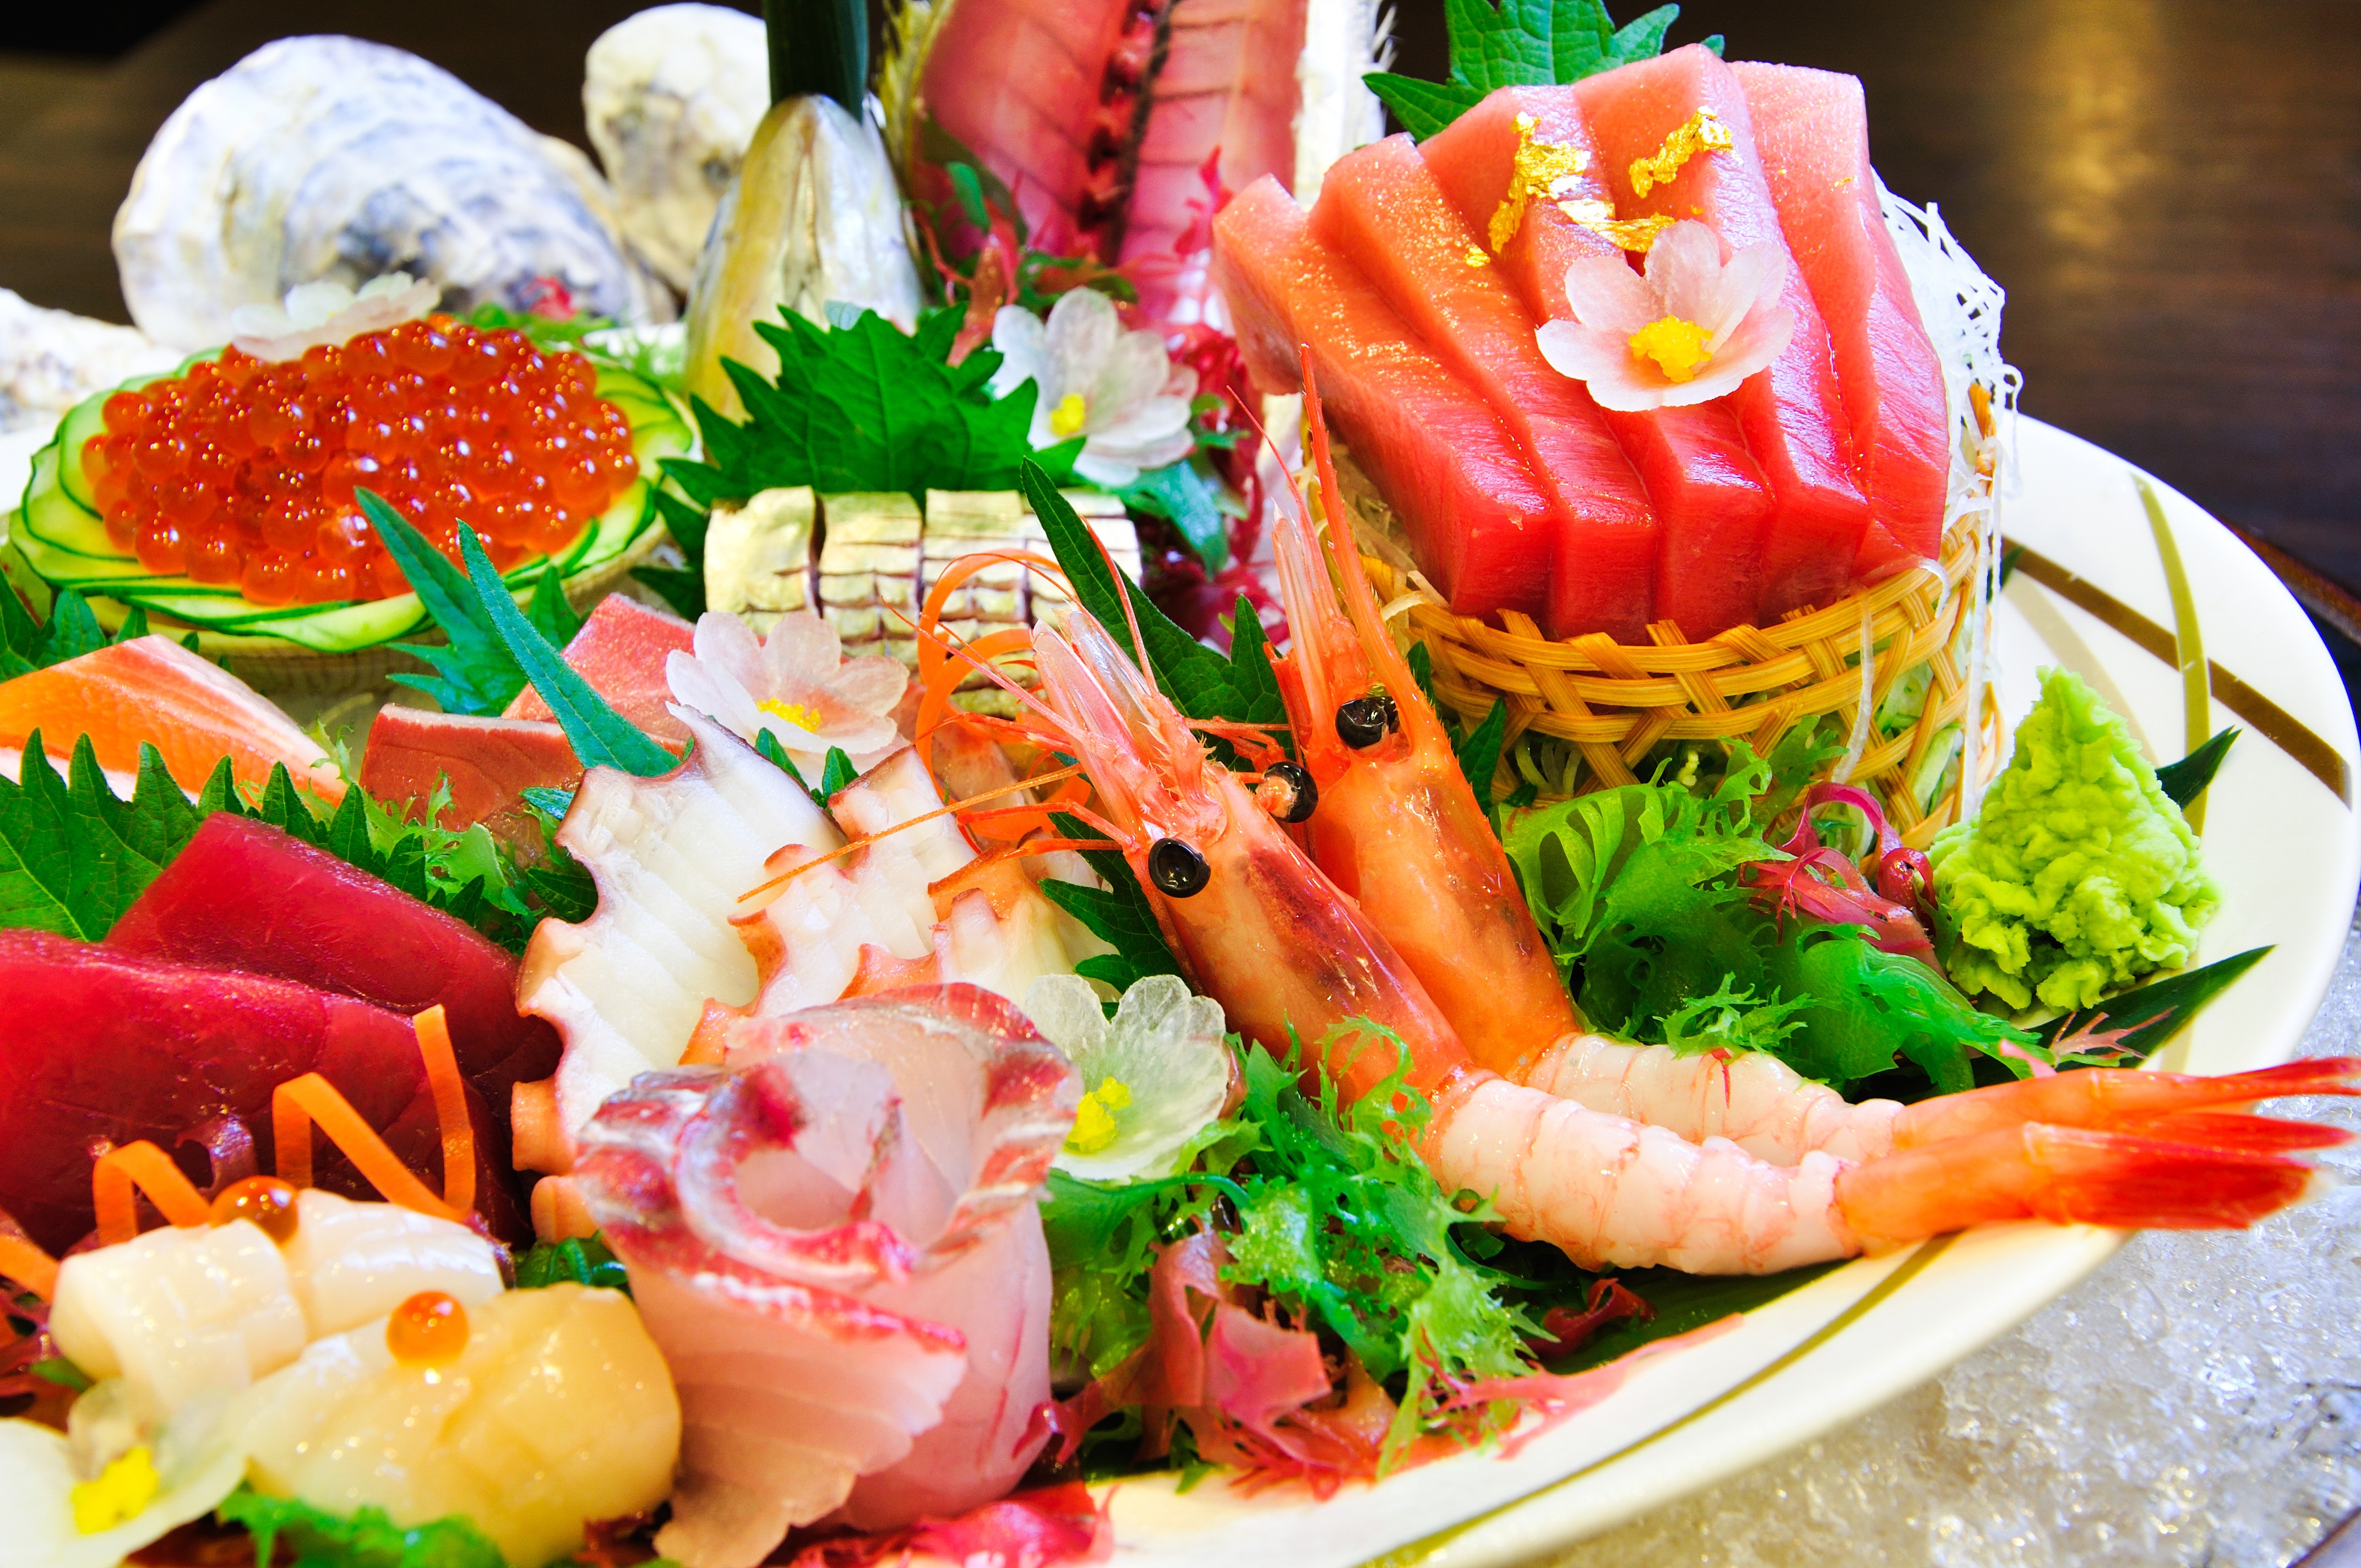 Japan’s minister of agriculture, forestry and fisheries attributed the popularity of seafood and Wagyu beef among Hong Kong residents to a record number of them travelling to Japan last year. Photo: Shutterstock